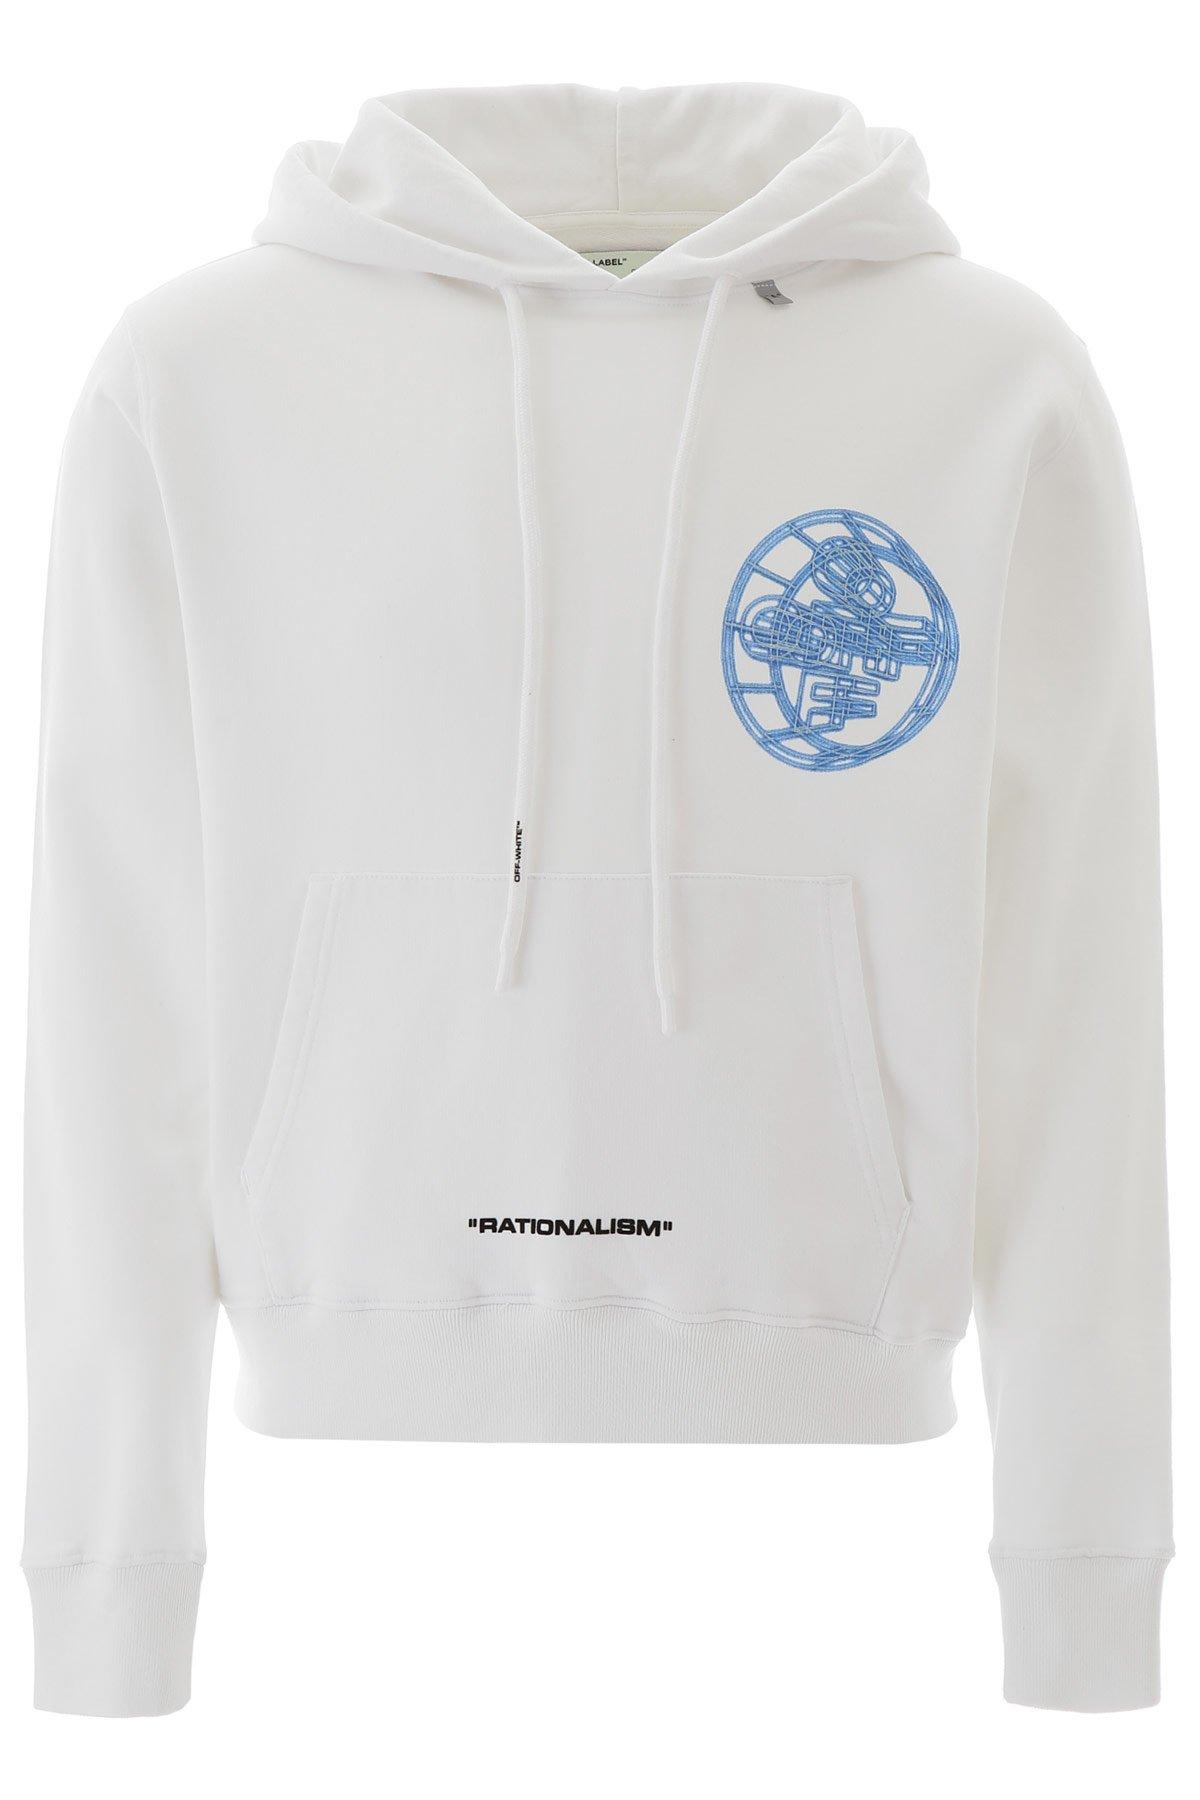 Off-White c/o Virgil Abloh 3d Crossed Off Hoodie in White,Blue (White) for  Men - Save 51% - Lyst